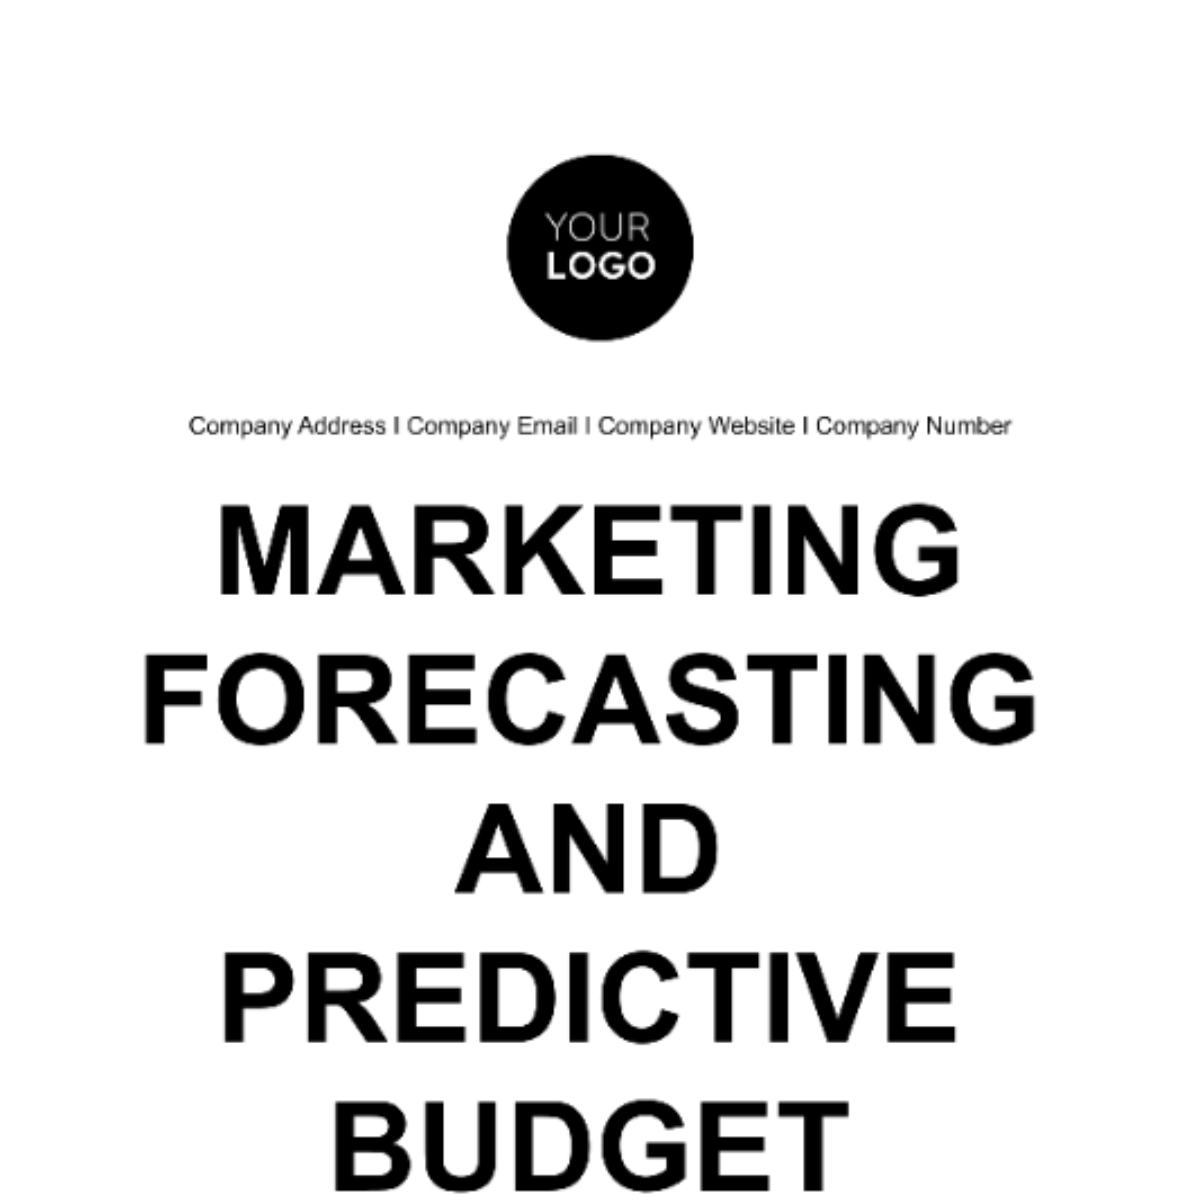 Marketing Forecasting and Predictive Budget Planning Template